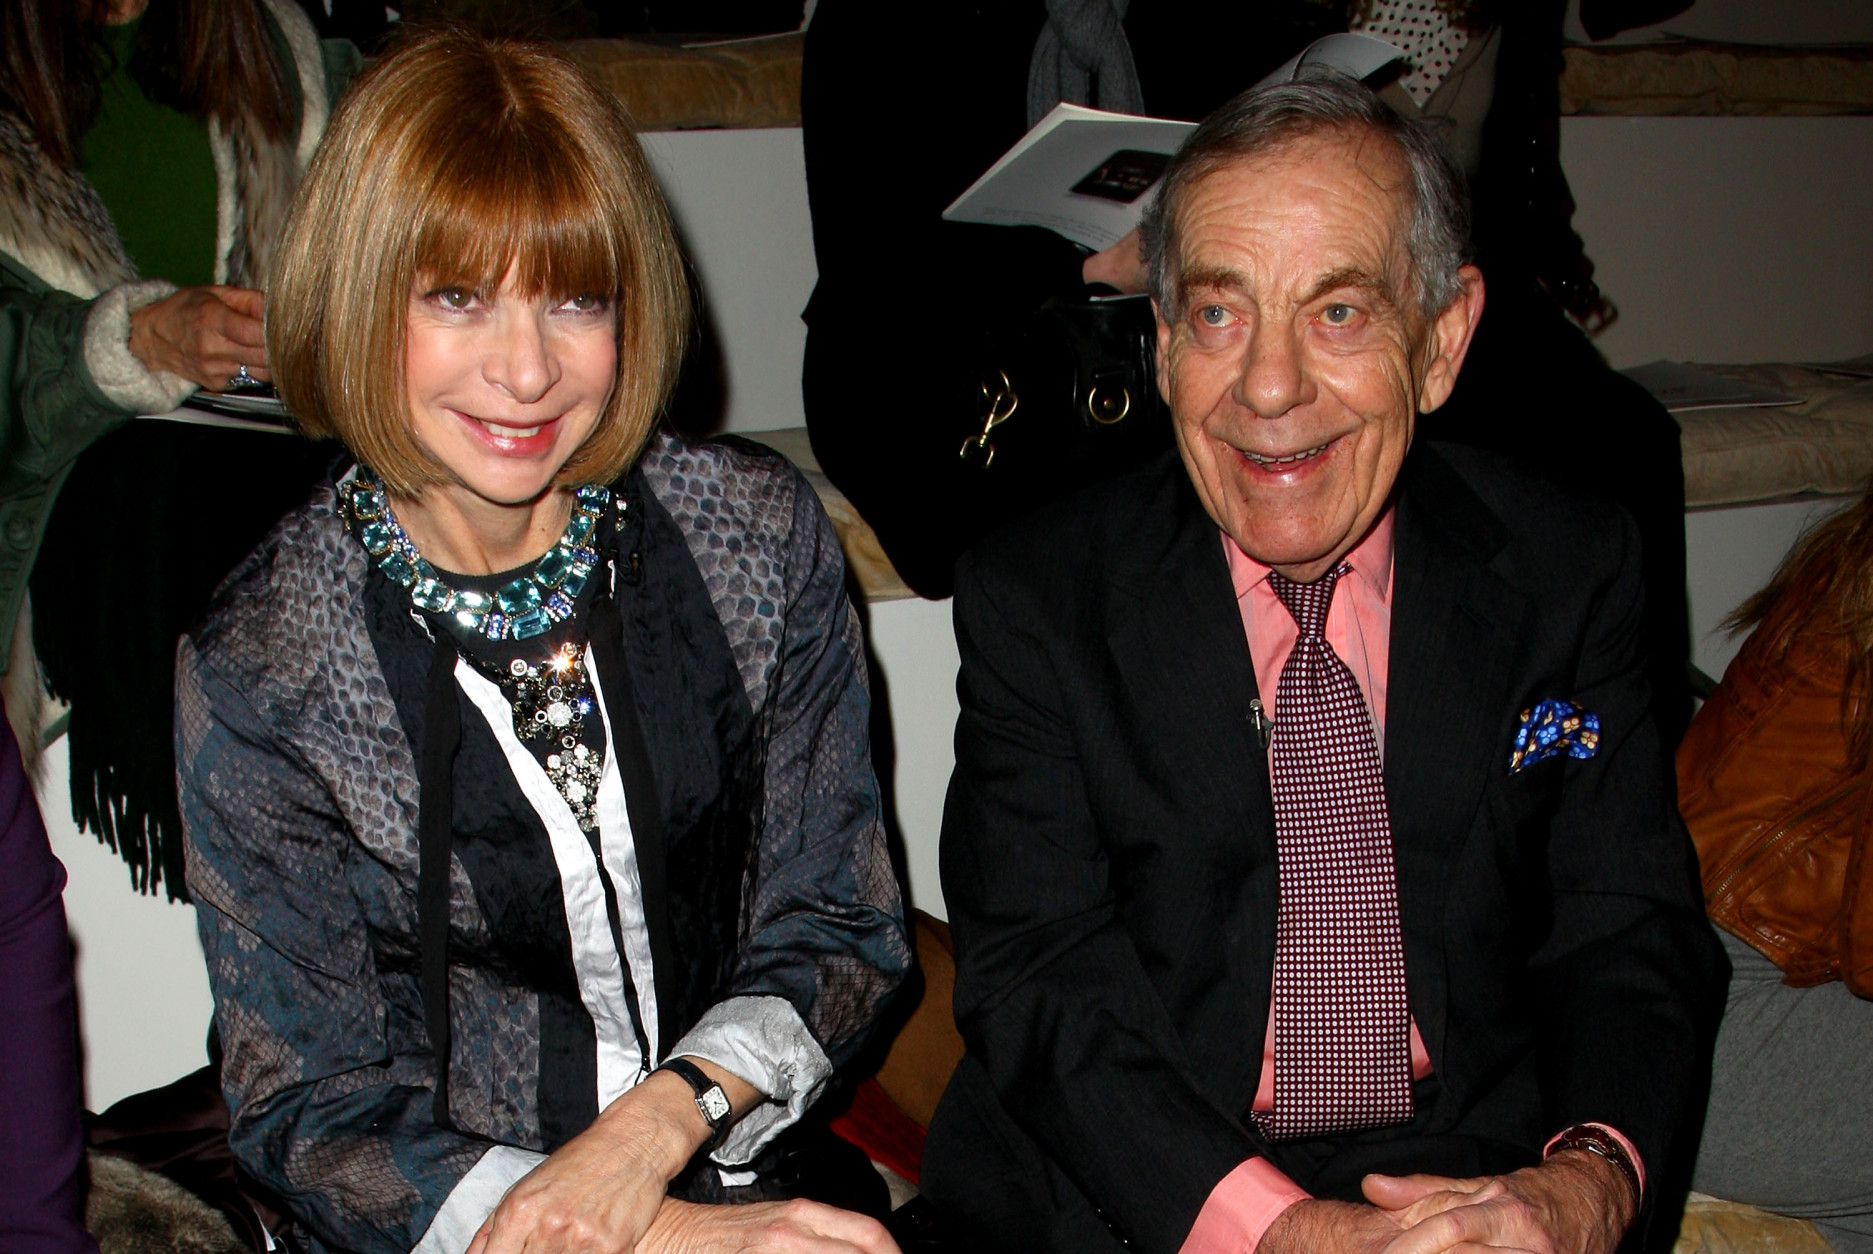 NEW YORK - FEBRUARY 20:  Vogue editor-in-chief Anna Wintour (L) and CBS correspondent Morley Safer attends the Ralph Lauren Fall 2009 fashion show during Mercedes-Benz Fashion Week at Skylight Studio on February 20, 2009 in New York City.  (Photo by Andrew H. Walker/Getty Images)